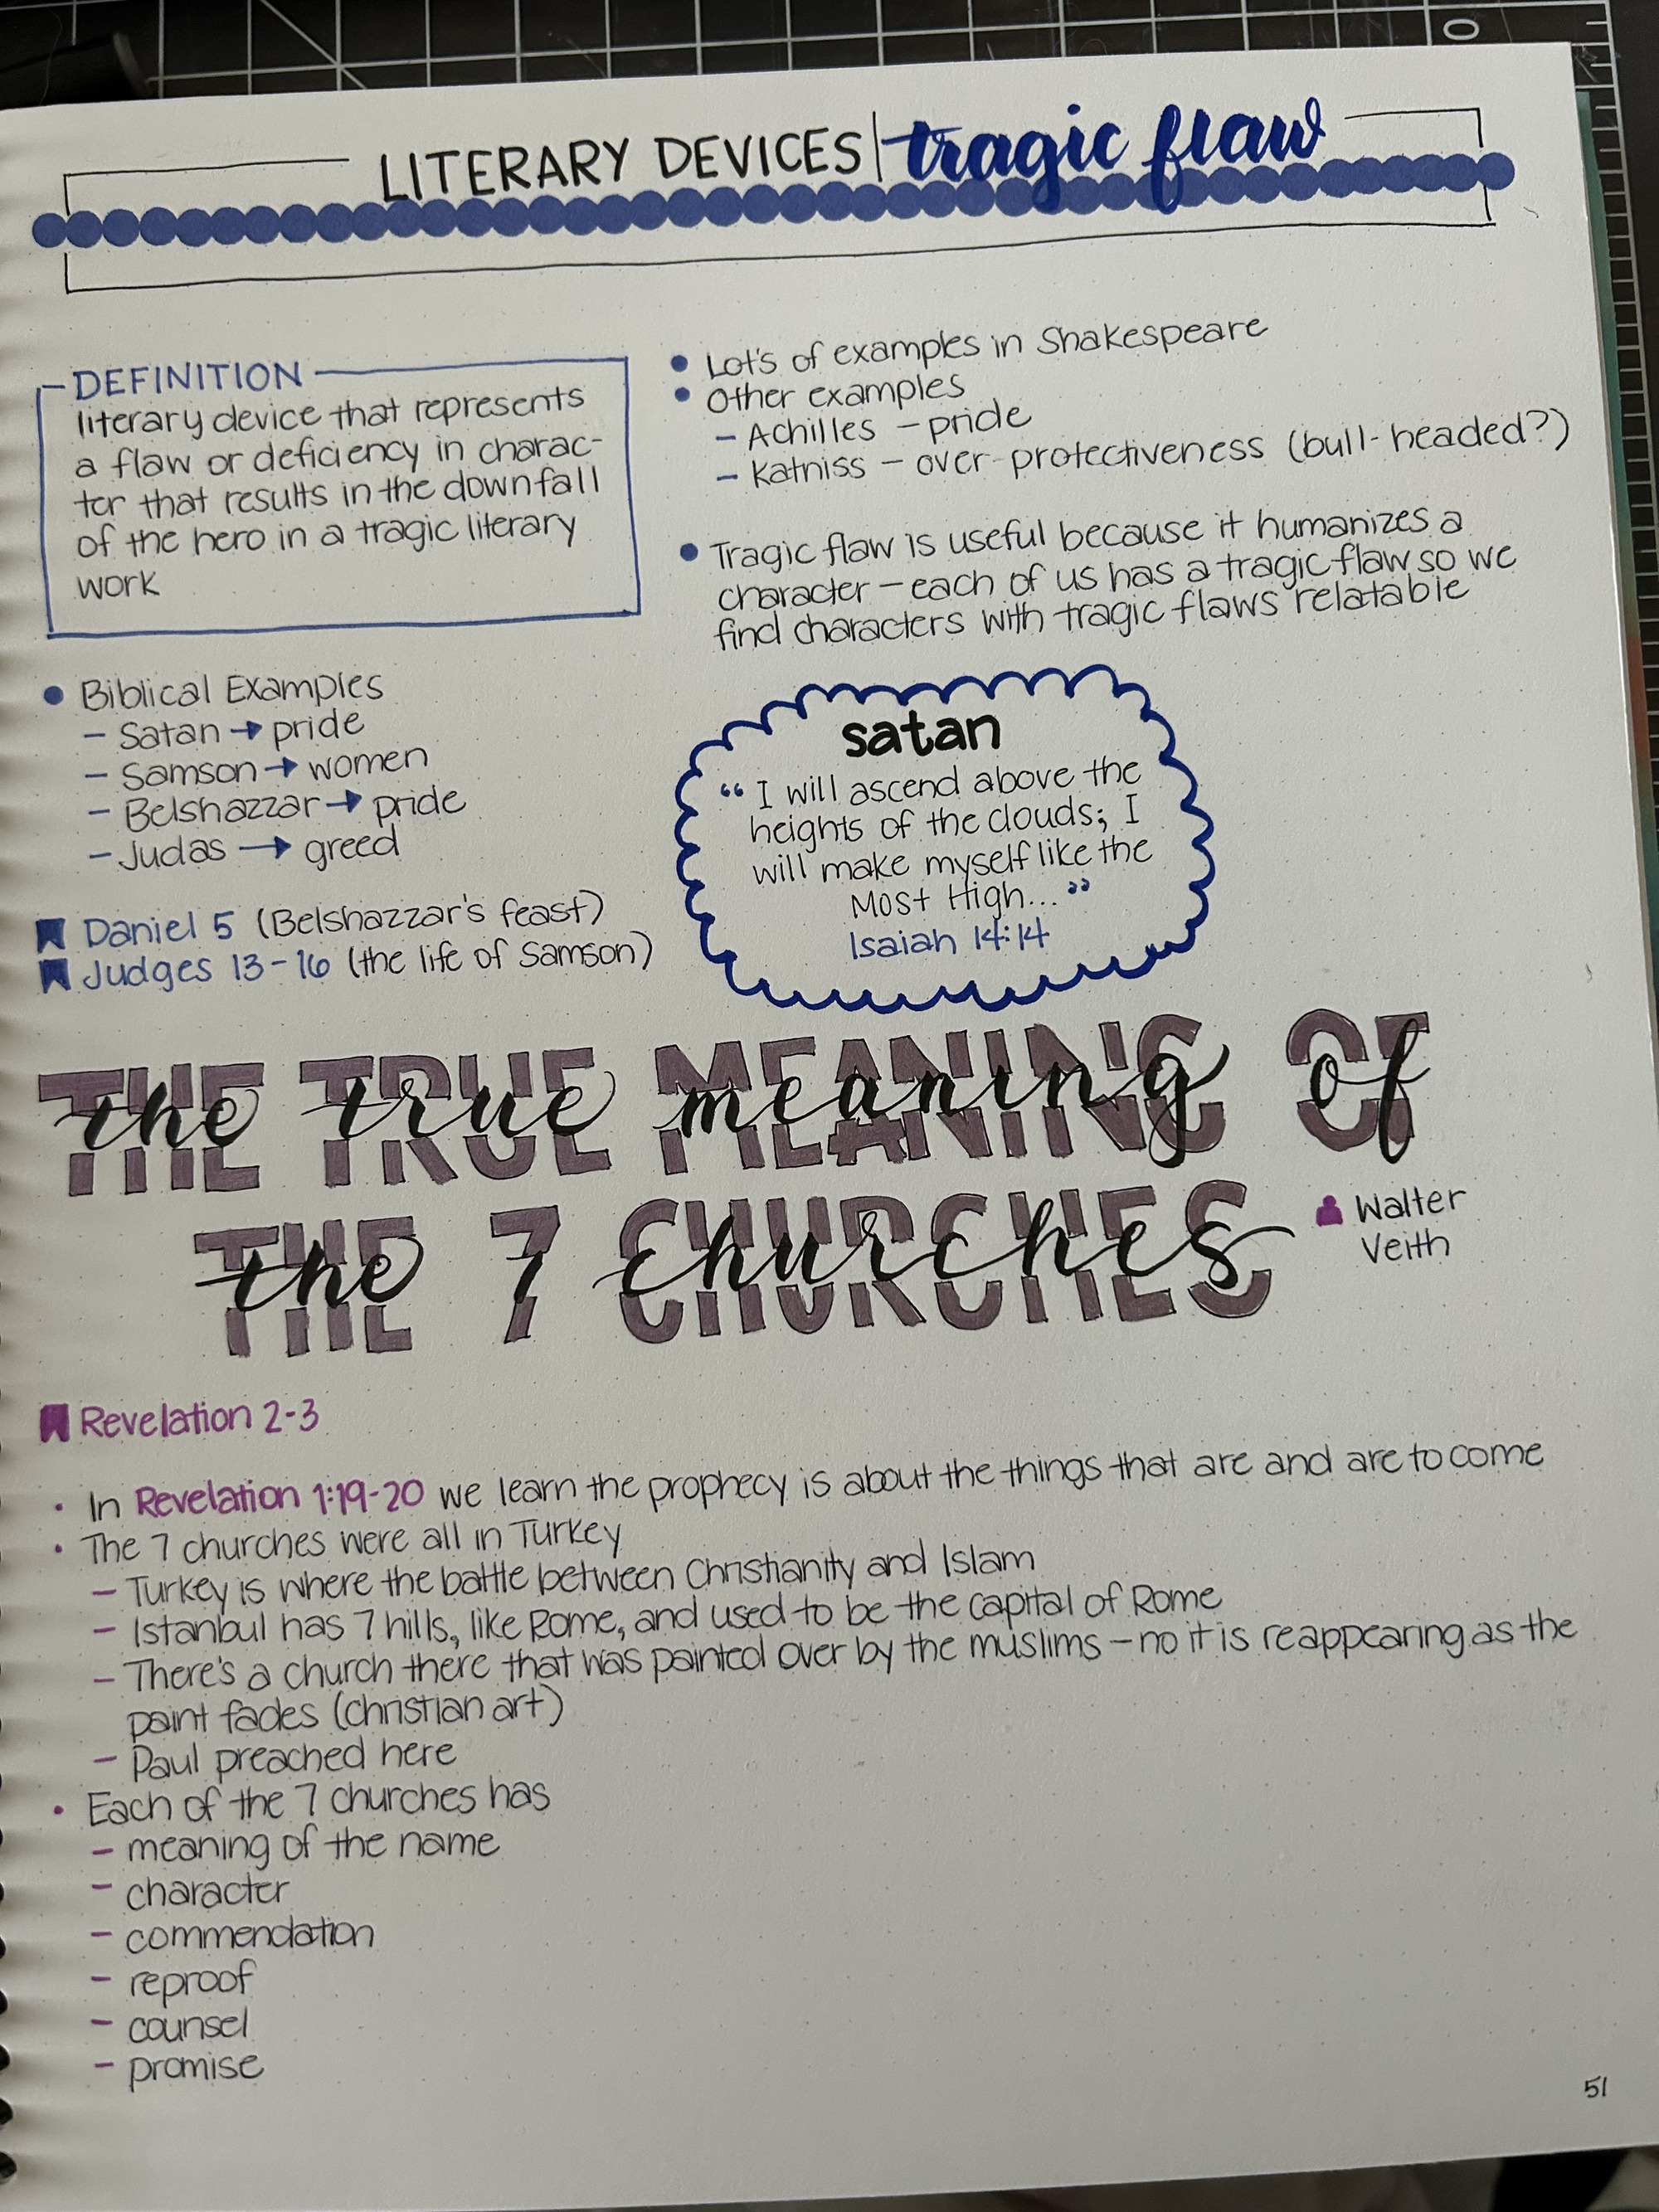 The True Meaning of the Seven Churches